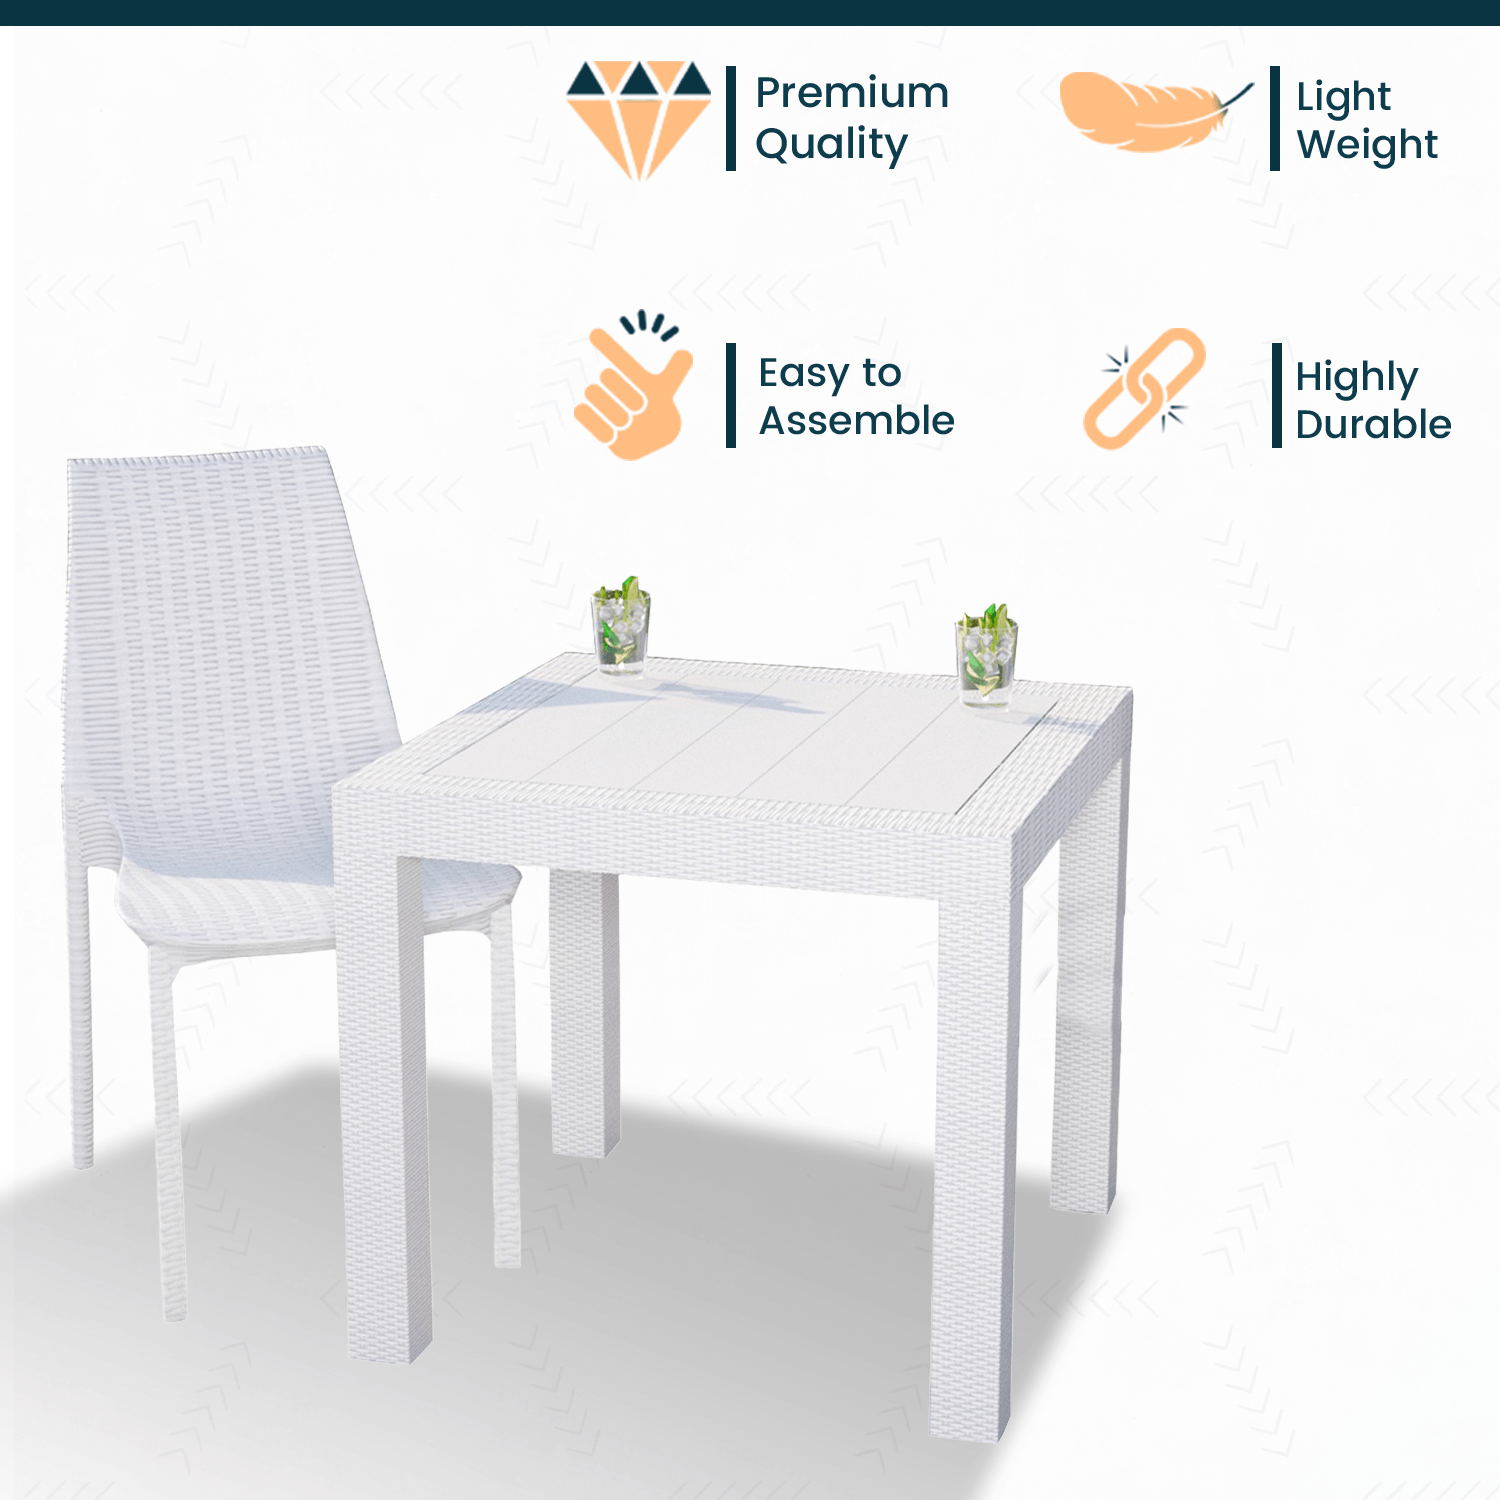 LeisureMod Kent Mid-Century Modern Weave Design 2-Piece Outdoor Patio Dining Set with Plastic Square Table and 2 Stackable Chairs for Patio, Poolside, and Backyard Garden (White) - image 4 of 18